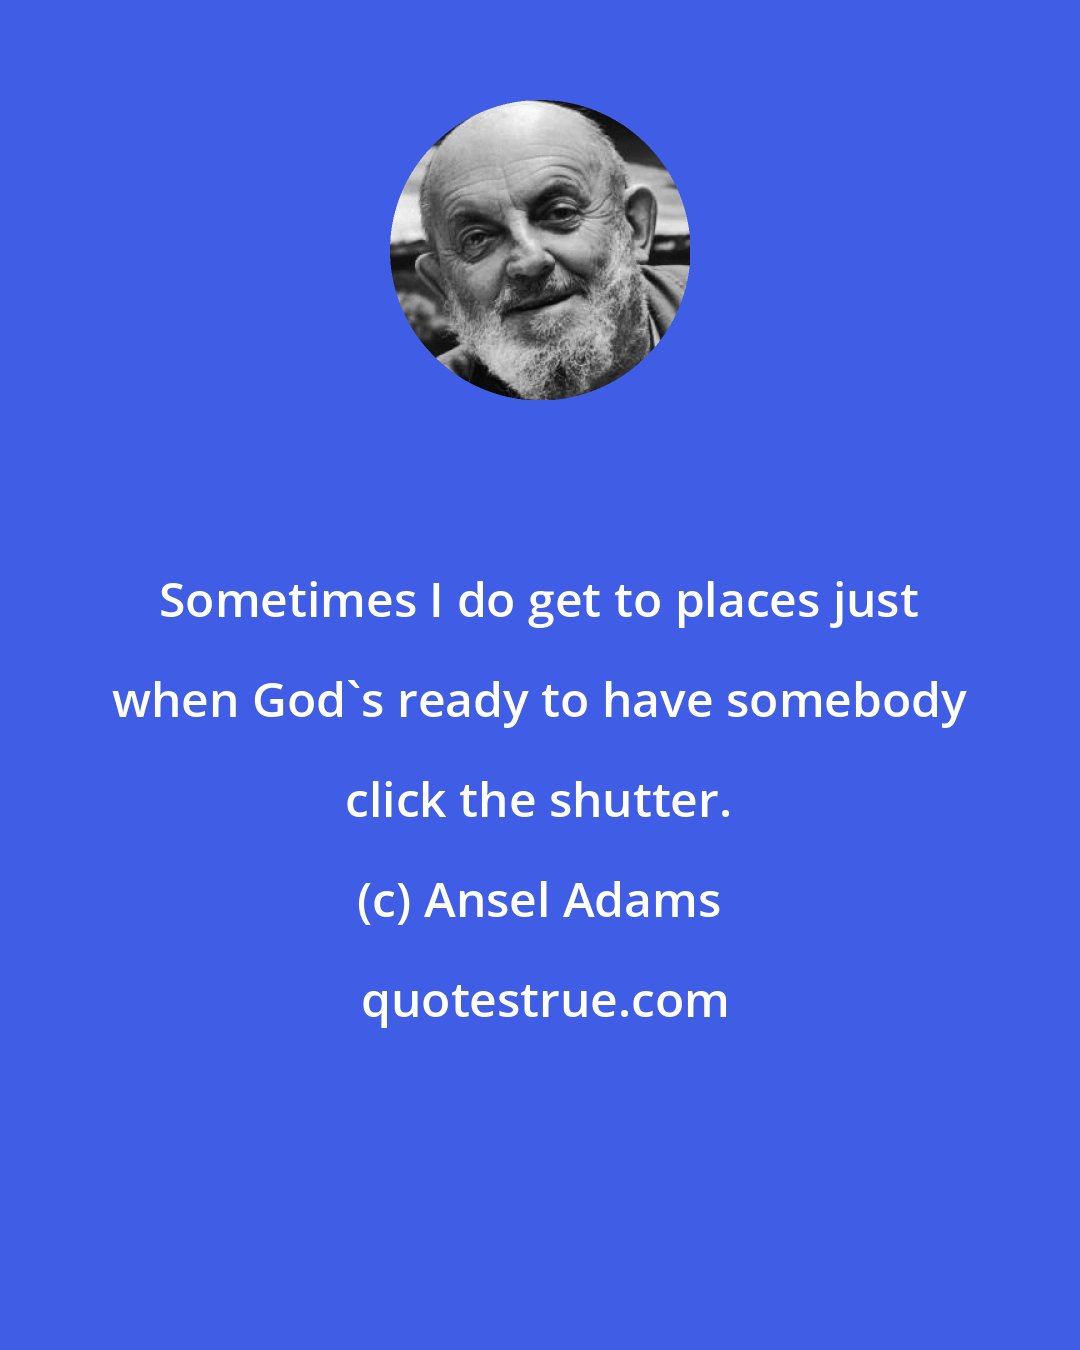 Ansel Adams: Sometimes I do get to places just when God's ready to have somebody click the shutter.